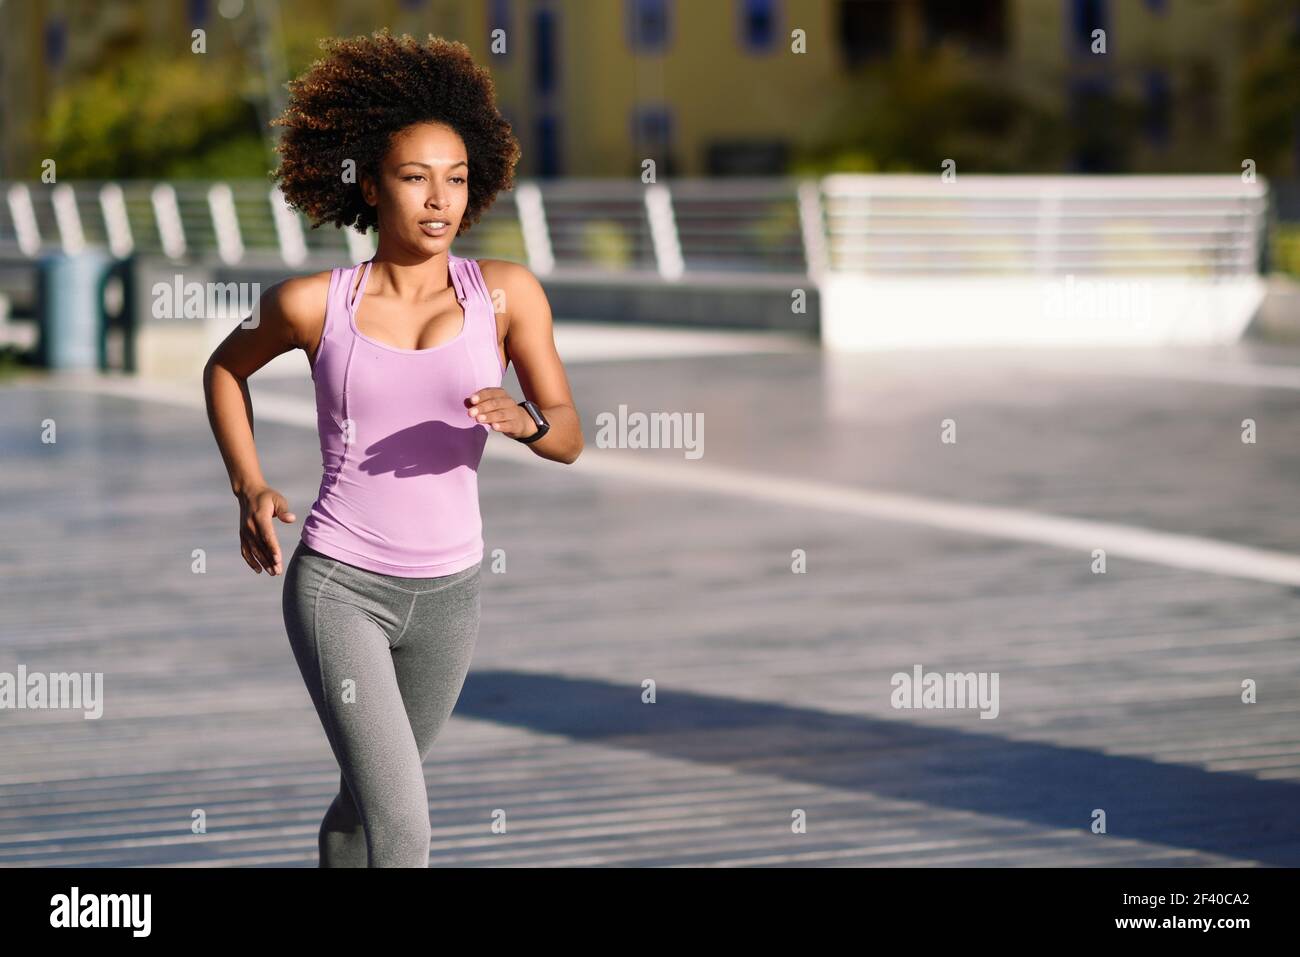 Black woman, afro hairstyle, running outdoors in urban road. Young female exercising in sport clothes. Stock Photo